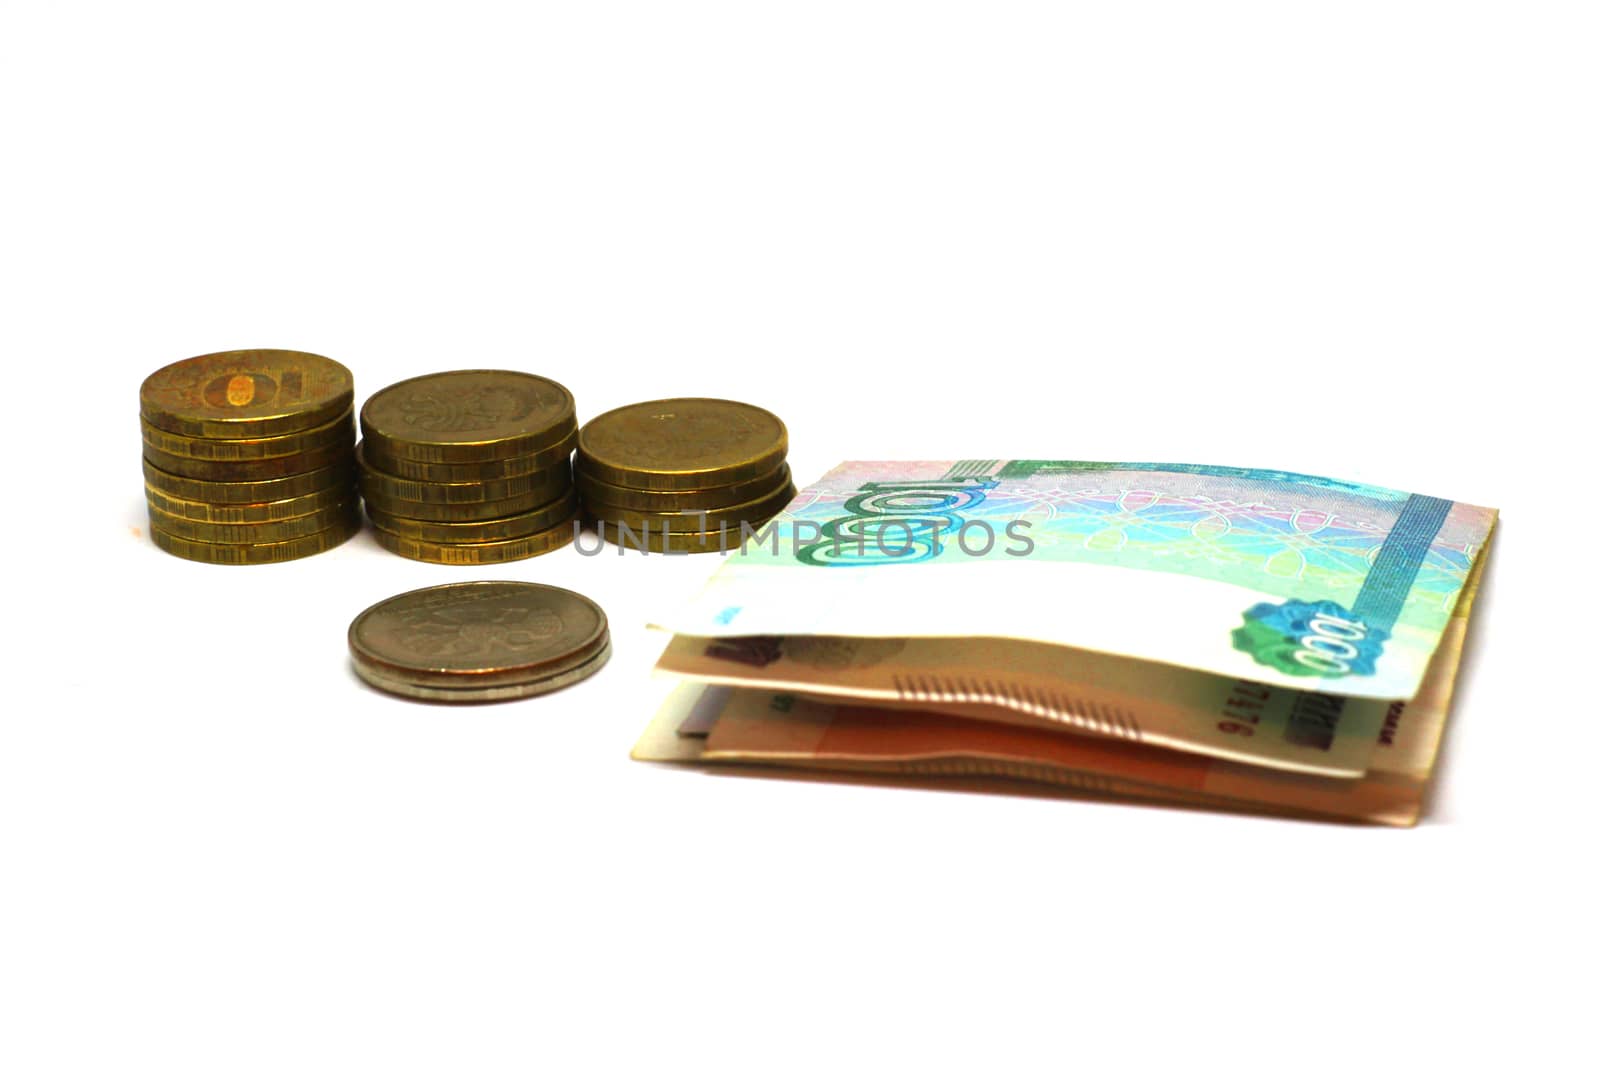 Russian money isolated on white background. Isolated